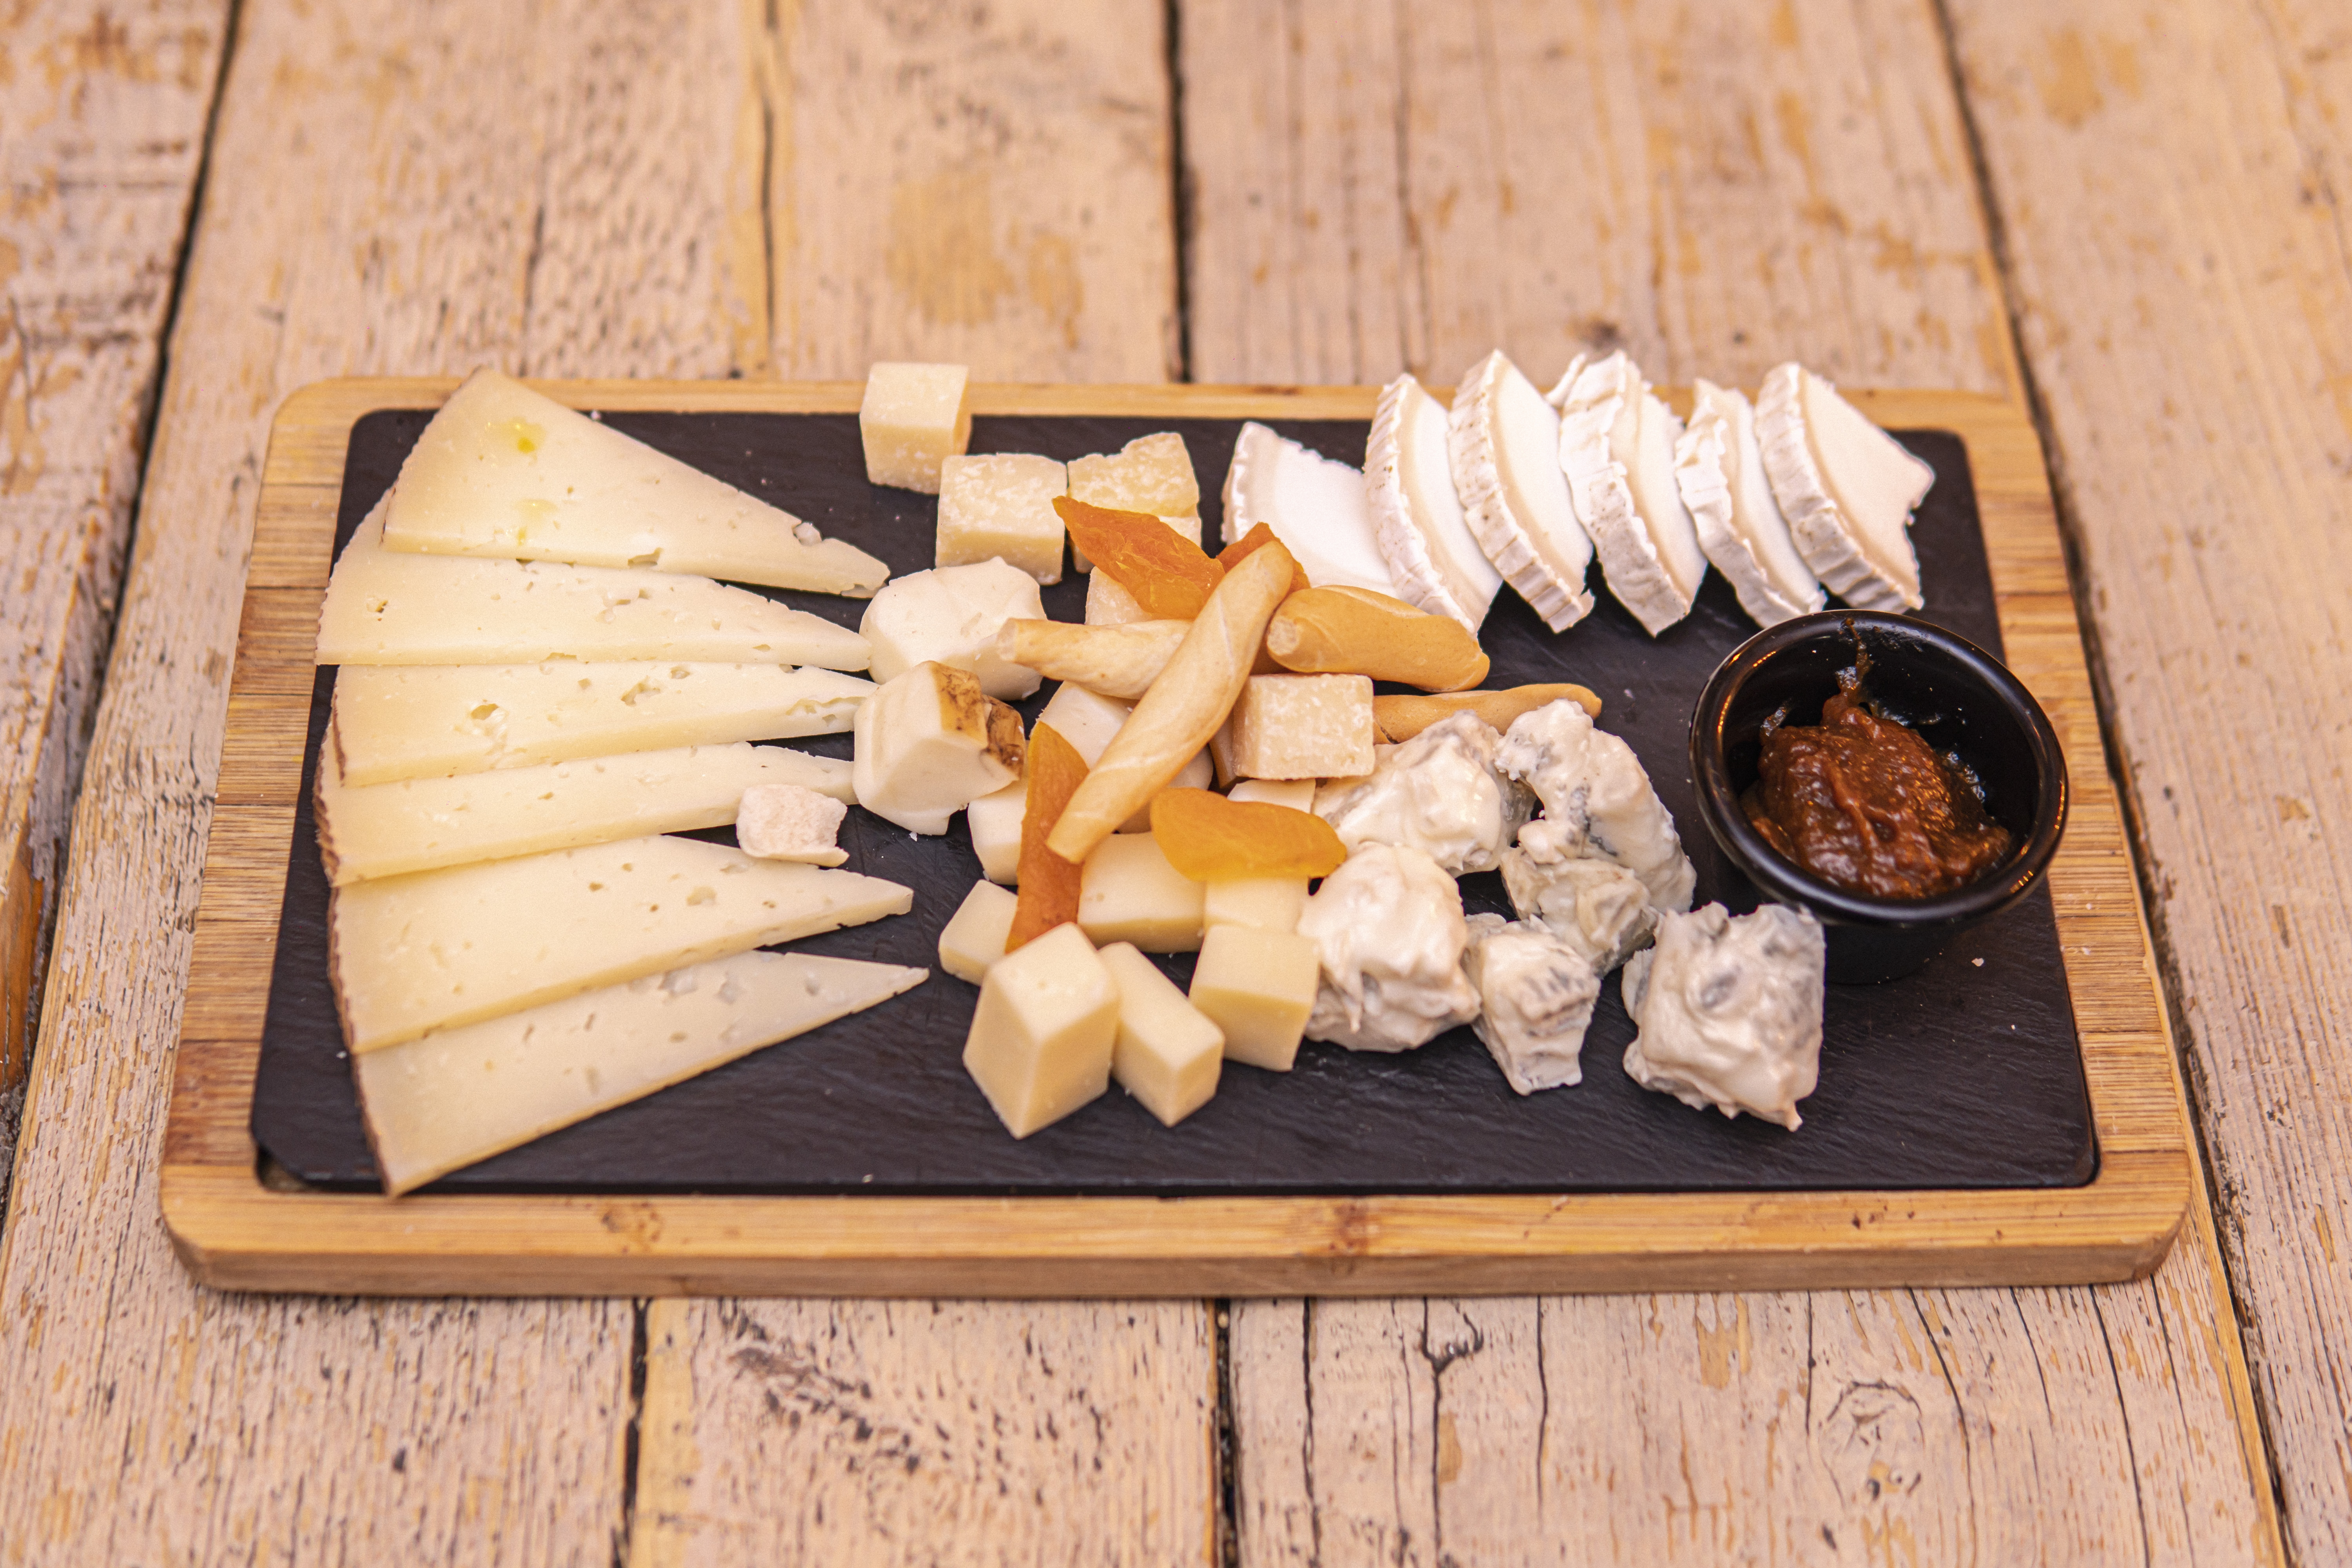 SELECTION OF CHEESES